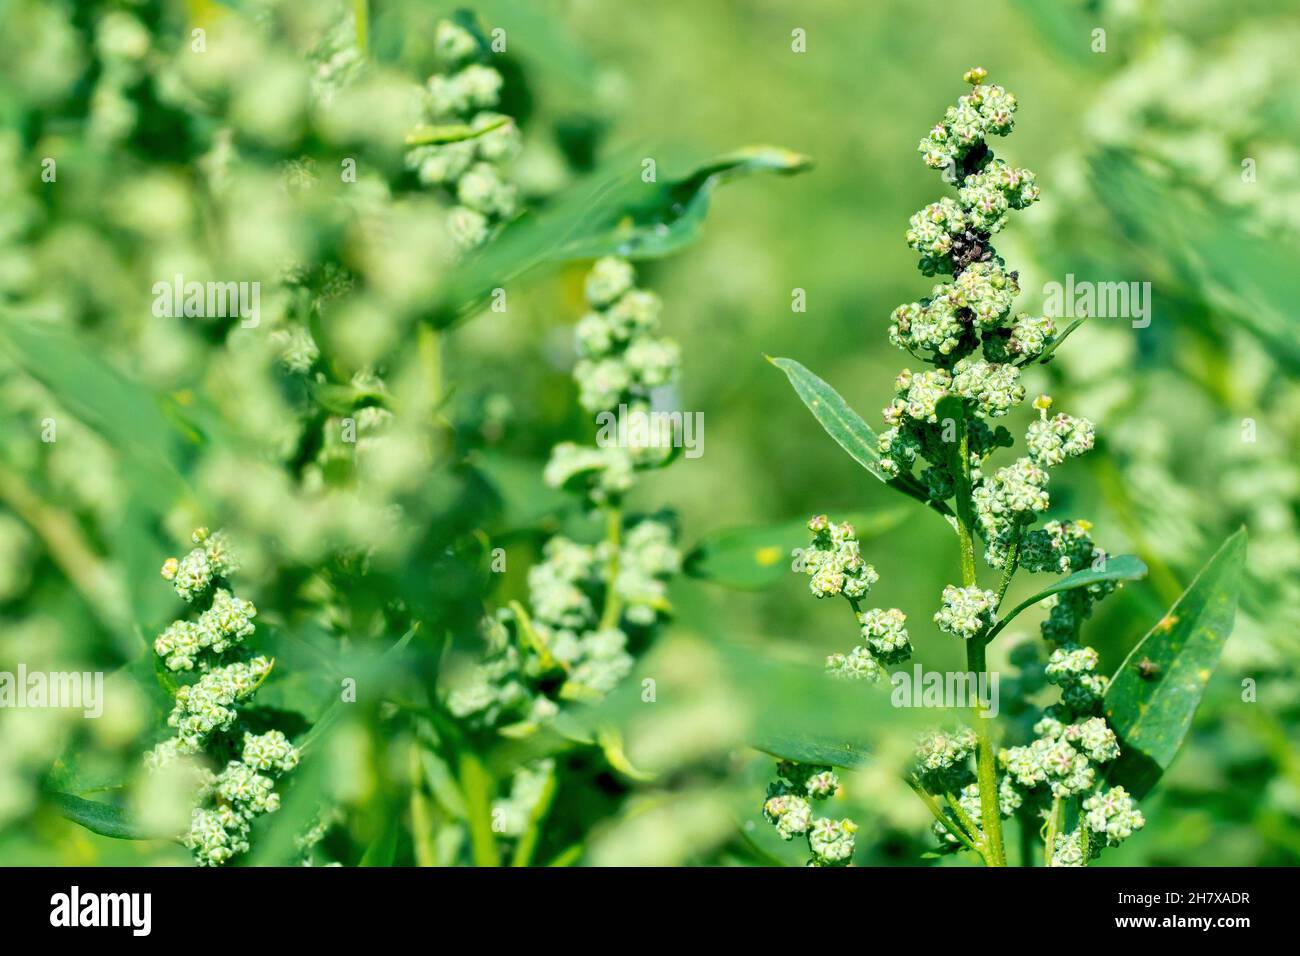 Fat Hen (chenopodium album), close up of a single flowering plant growing amongst a mass of others. Stock Photo